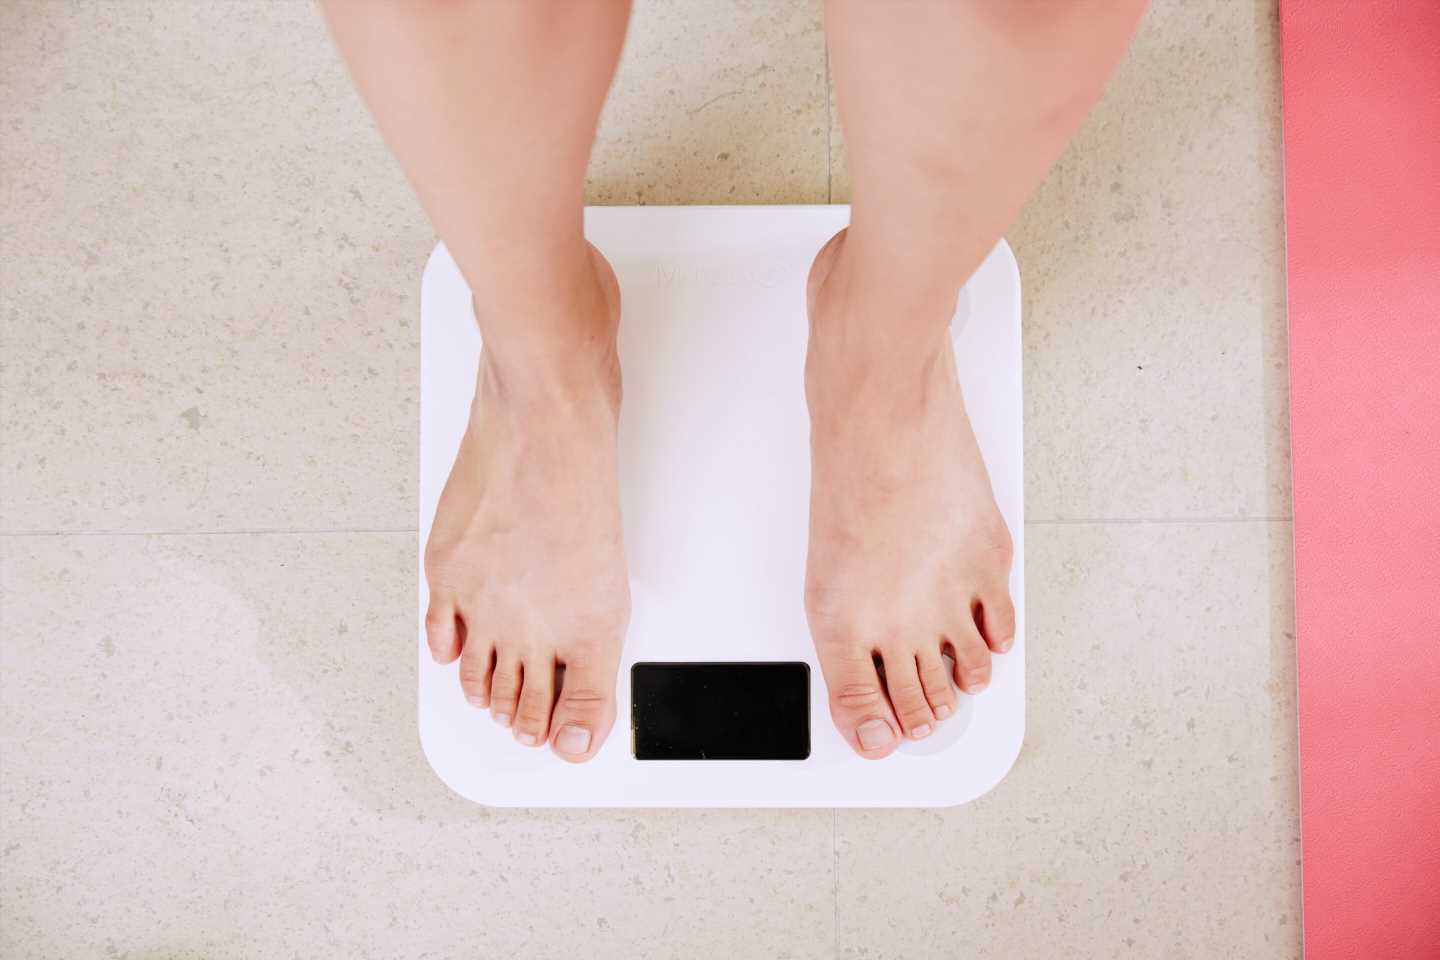 Weight loss may be early predictor of Alzheimer’s disease in those with Down syndrome